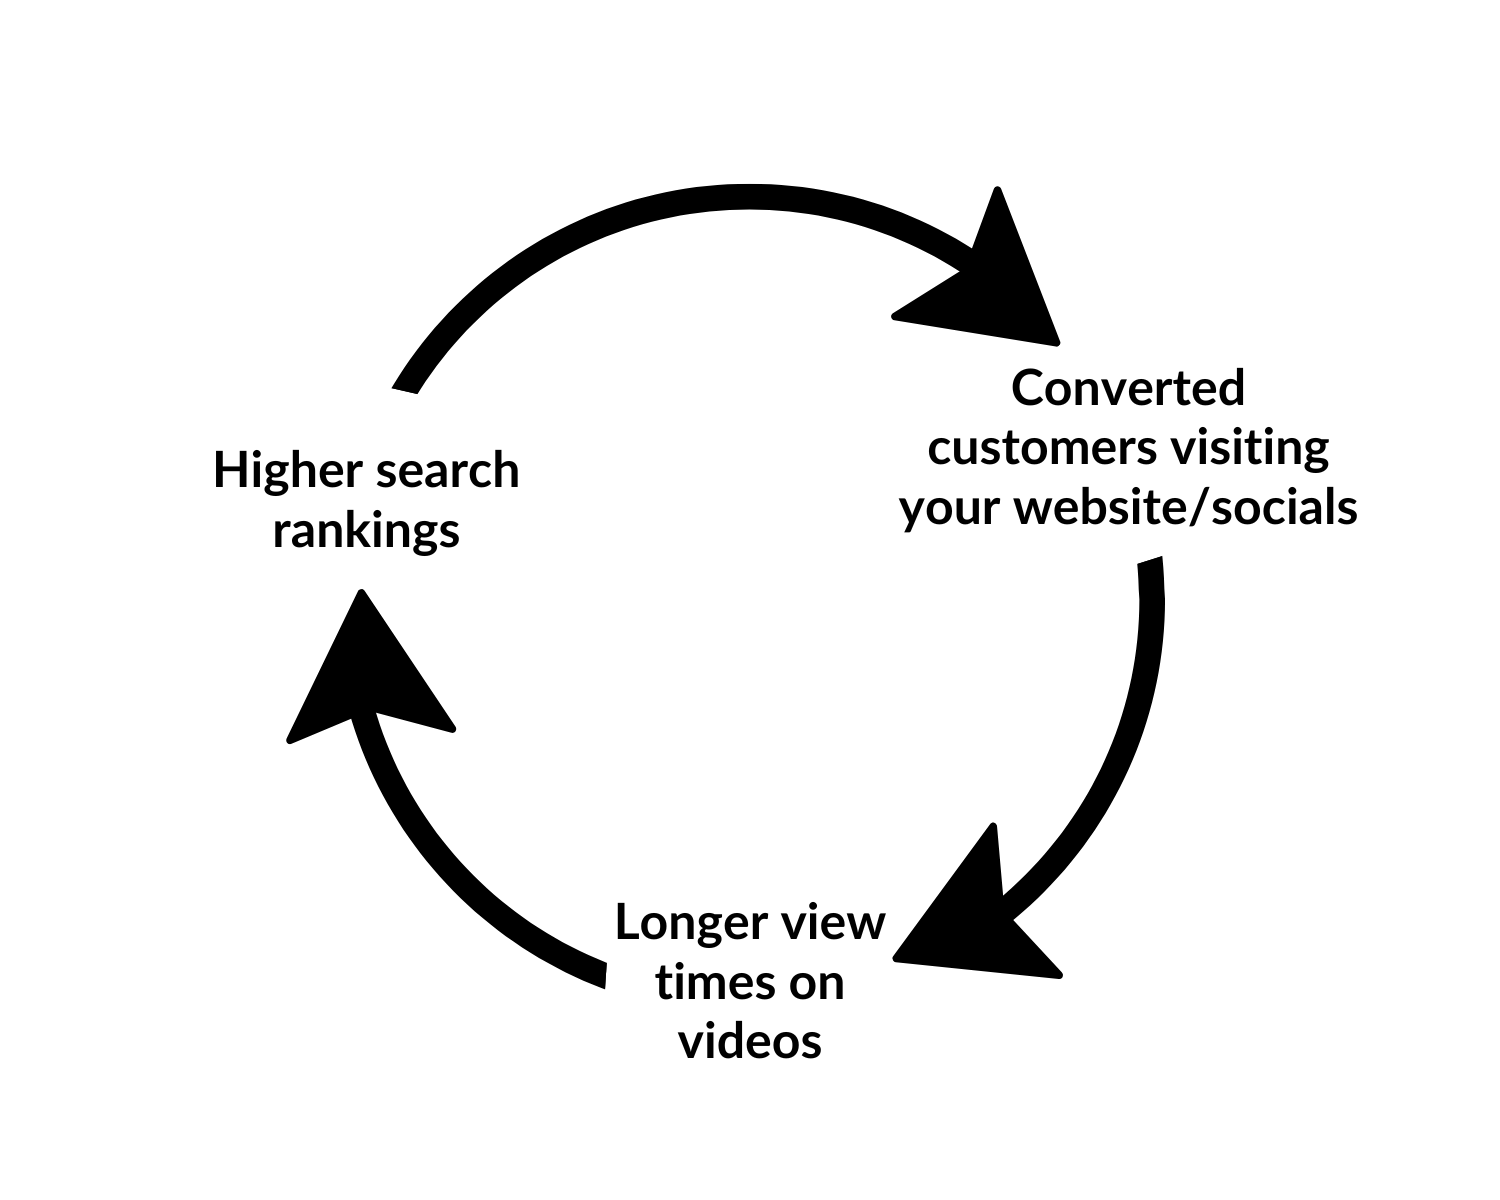 higher search rankings leads to converted customers visiting your website and social channels which leads to longer view times on videos